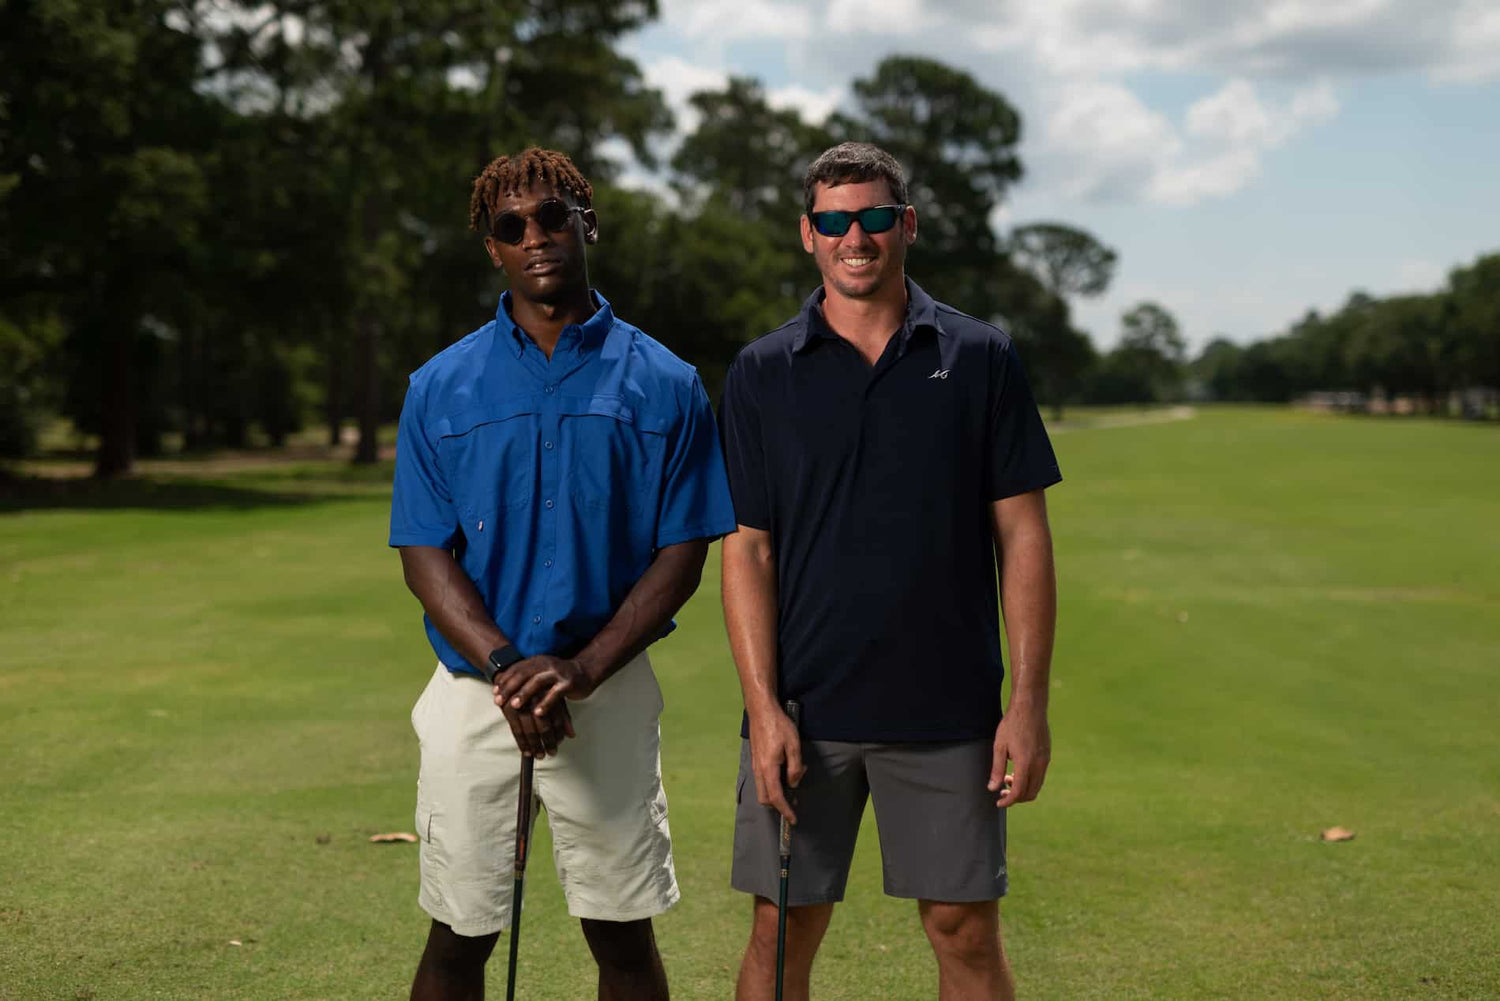 Two men on golf course holding golf clubs and wearing MSC shorts